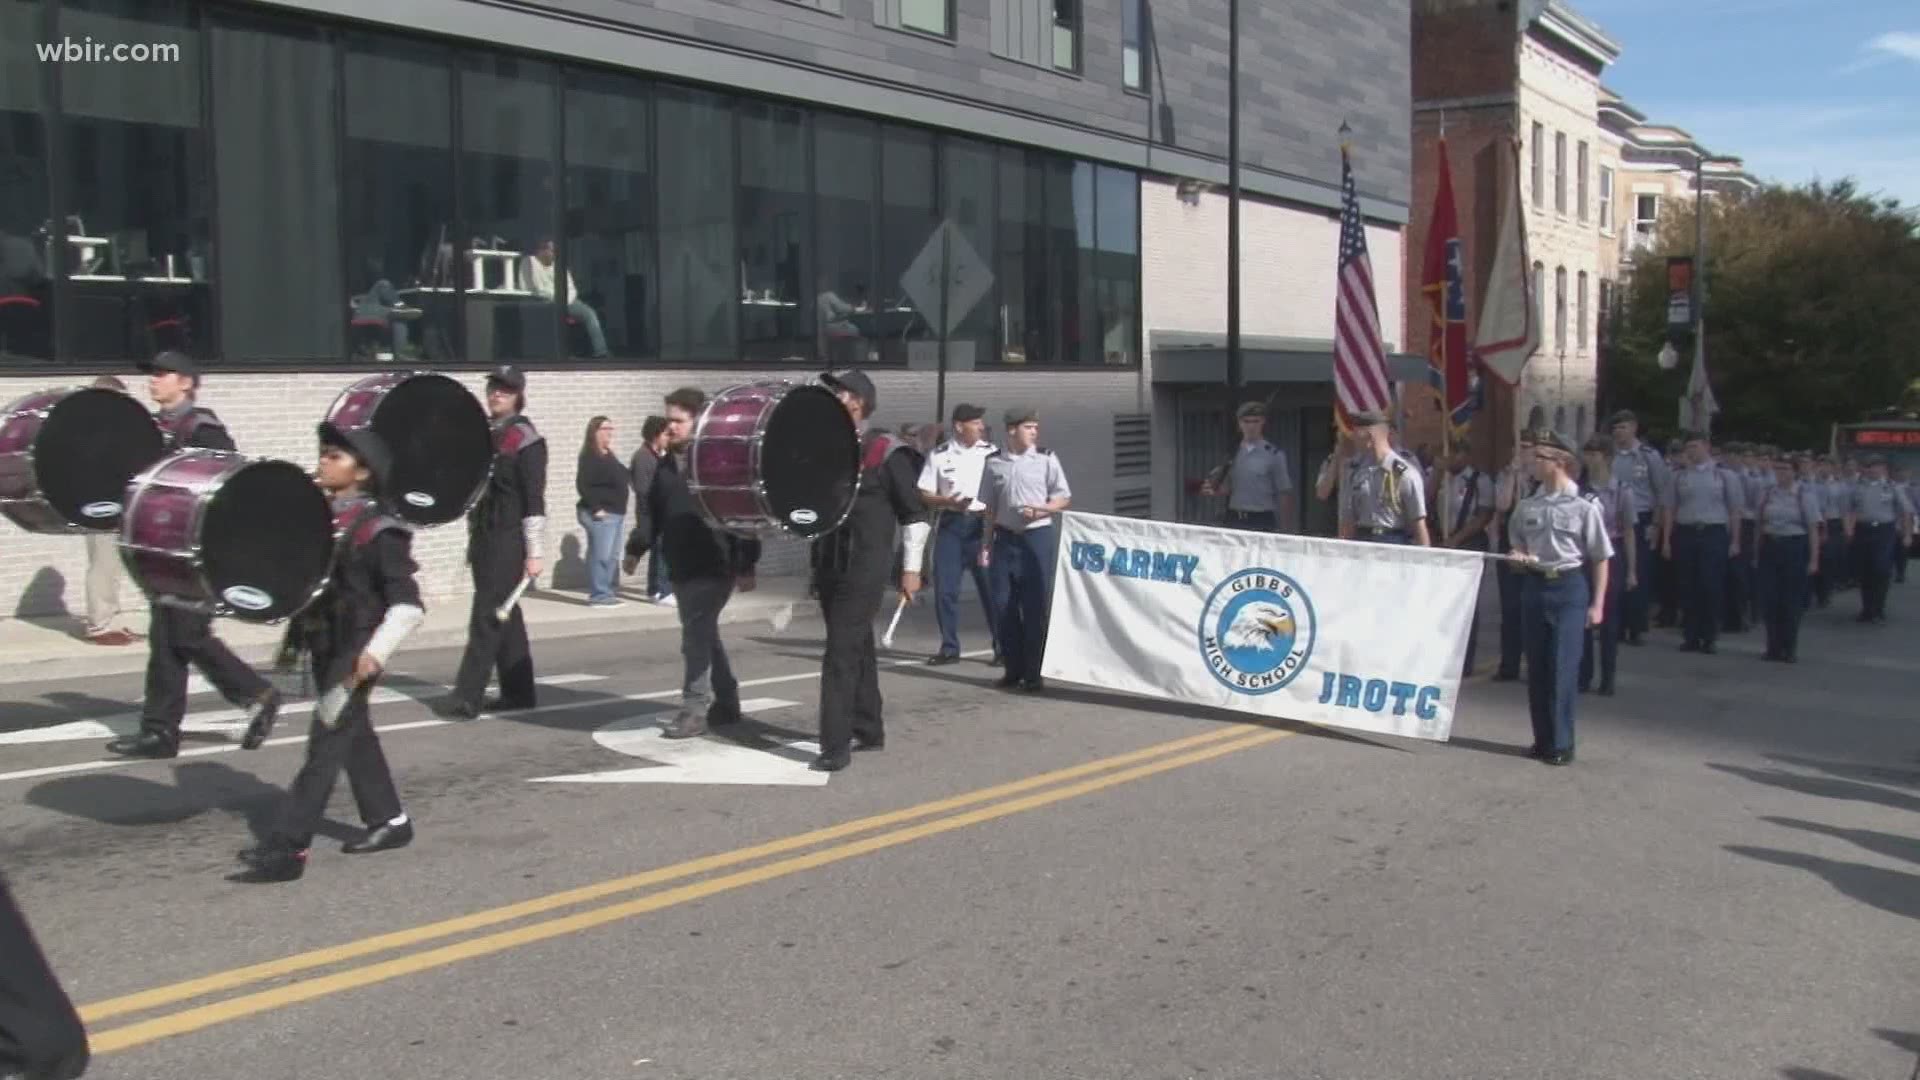 For only the third time in its almost 100 year history, Knoxville won't have a parade on Veterans Day.